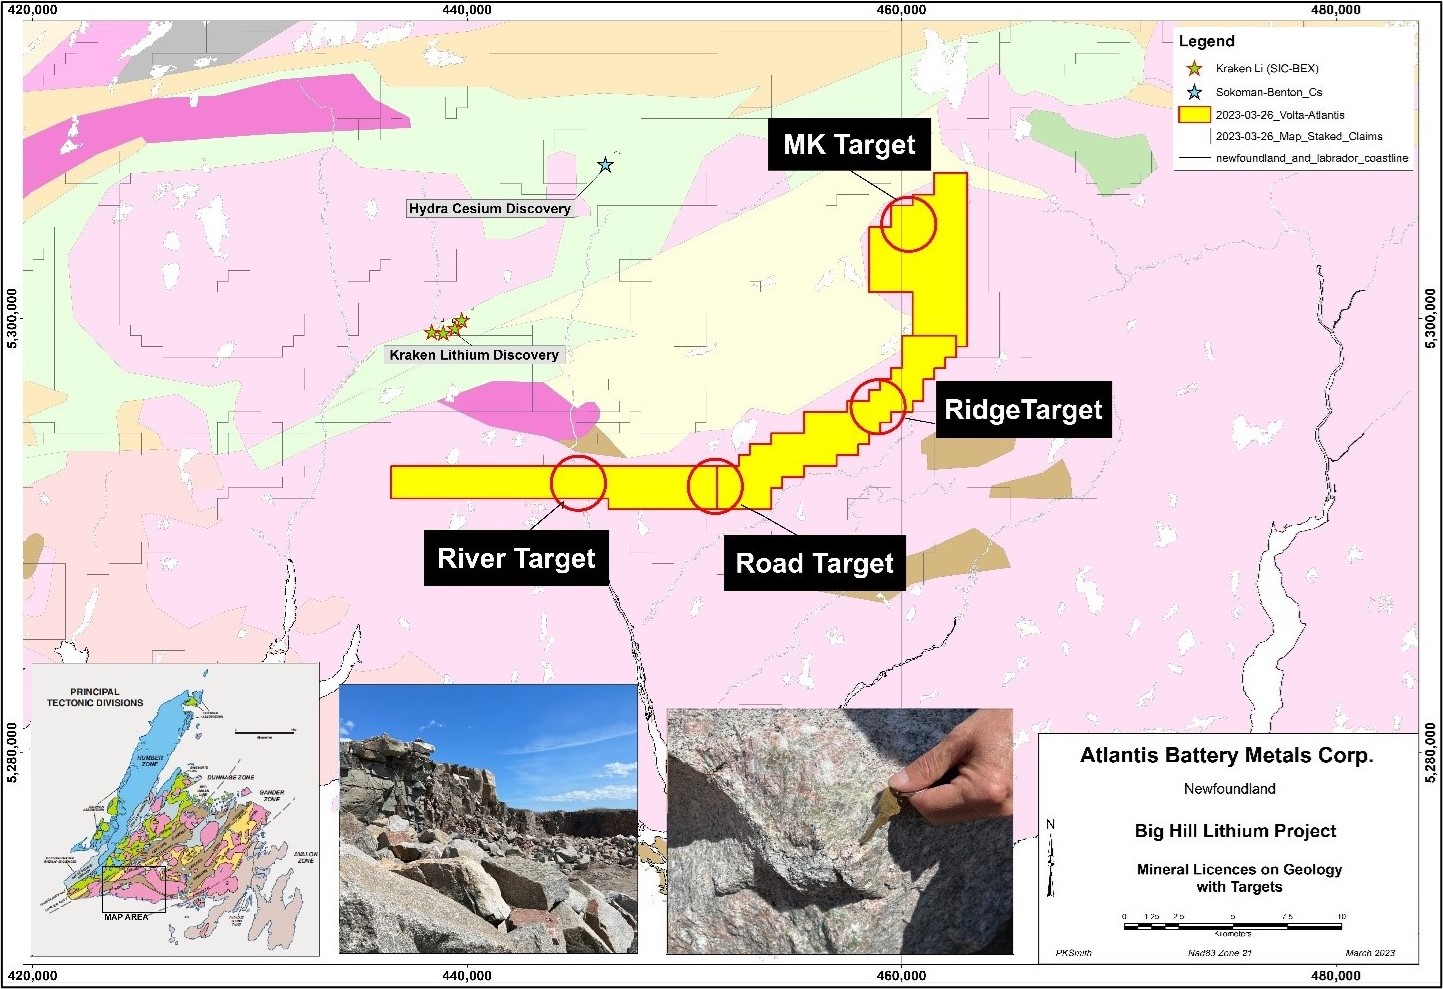 Priority Target Areas, Big Hill Lithium Project, Newfoundland, Canada